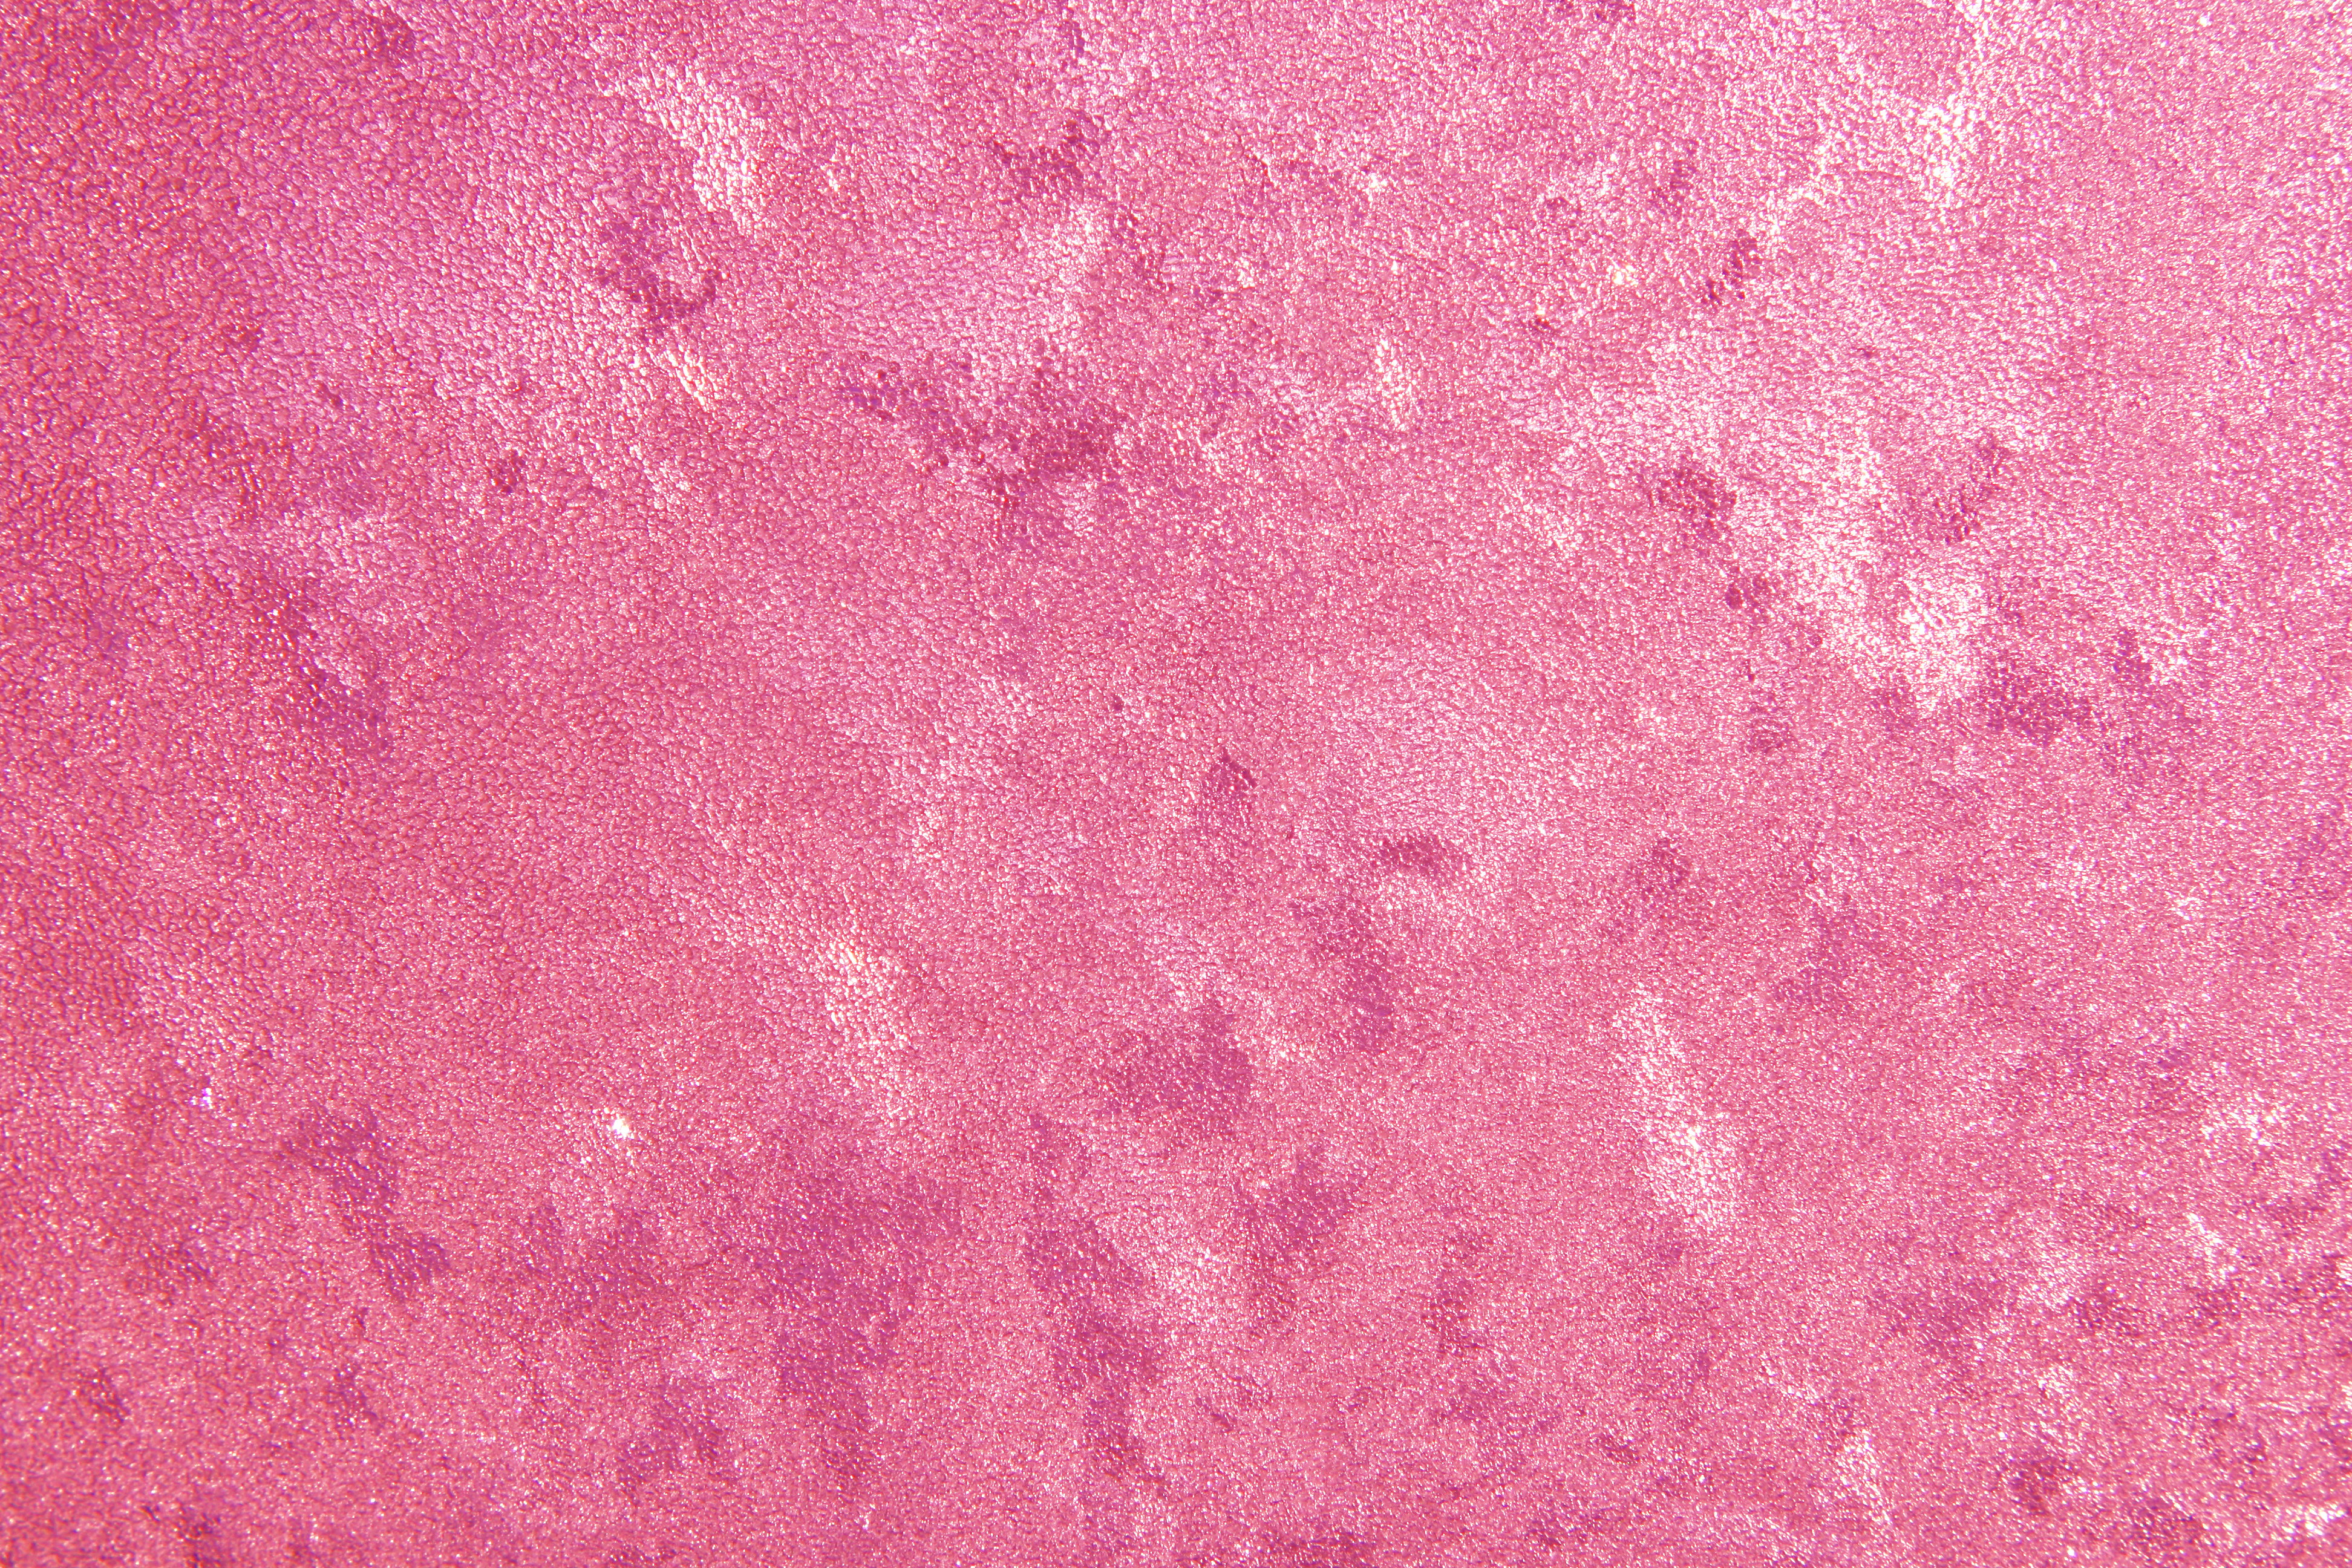 Frost on Glass Close Up Texture Colorized Pink Picture | Free ...